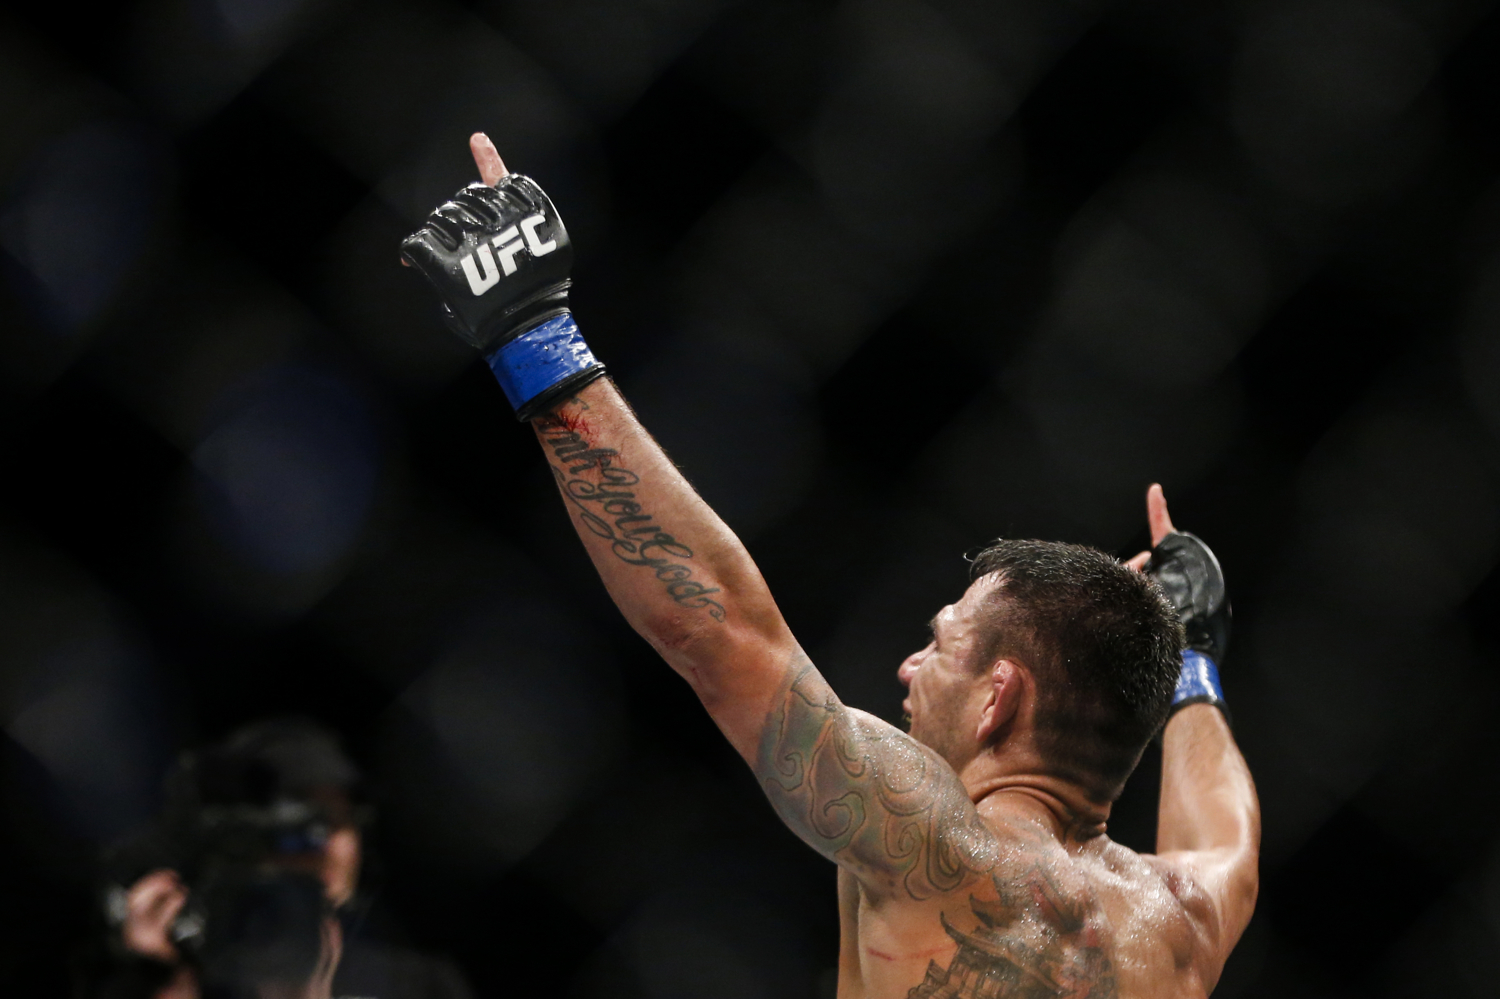  Rafael dos Anjos of Brazil celebrates his welterweight bout win over Tarec Saffiedine of Belgium at the UFC Fight Night at the Singapore Indoor Stadium on June 17, 2017. 